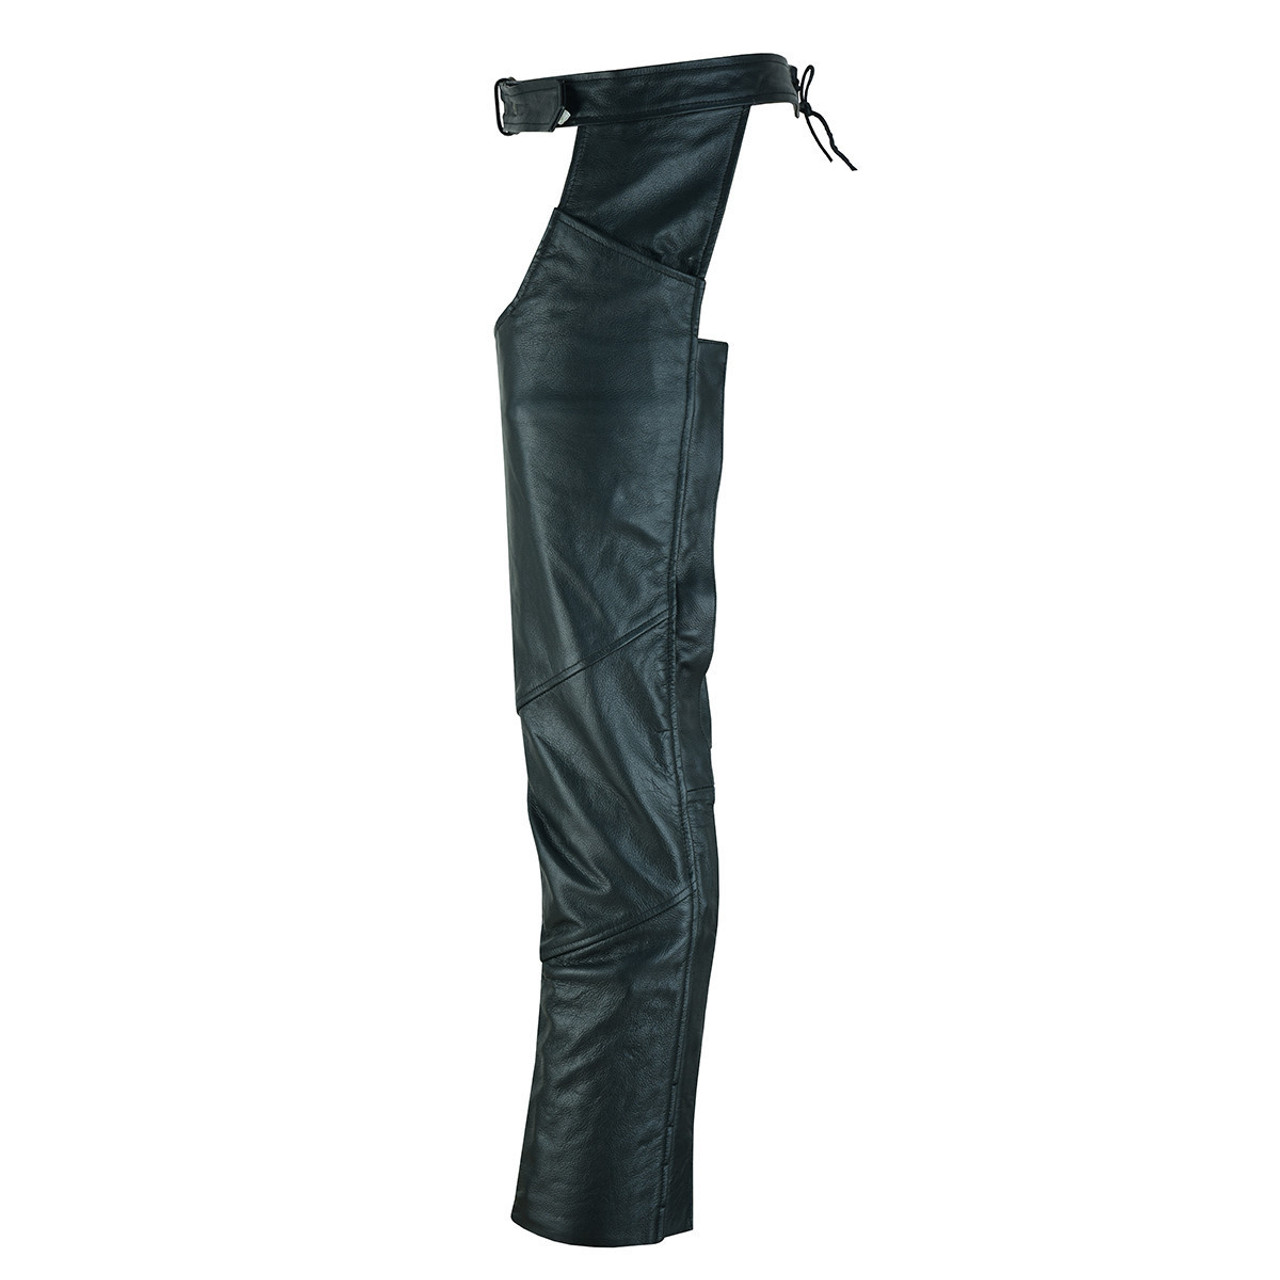 Vance Leather Unisex Black Zip-out Insulated Pants Style Biker Leather  Motorcycle Chaps